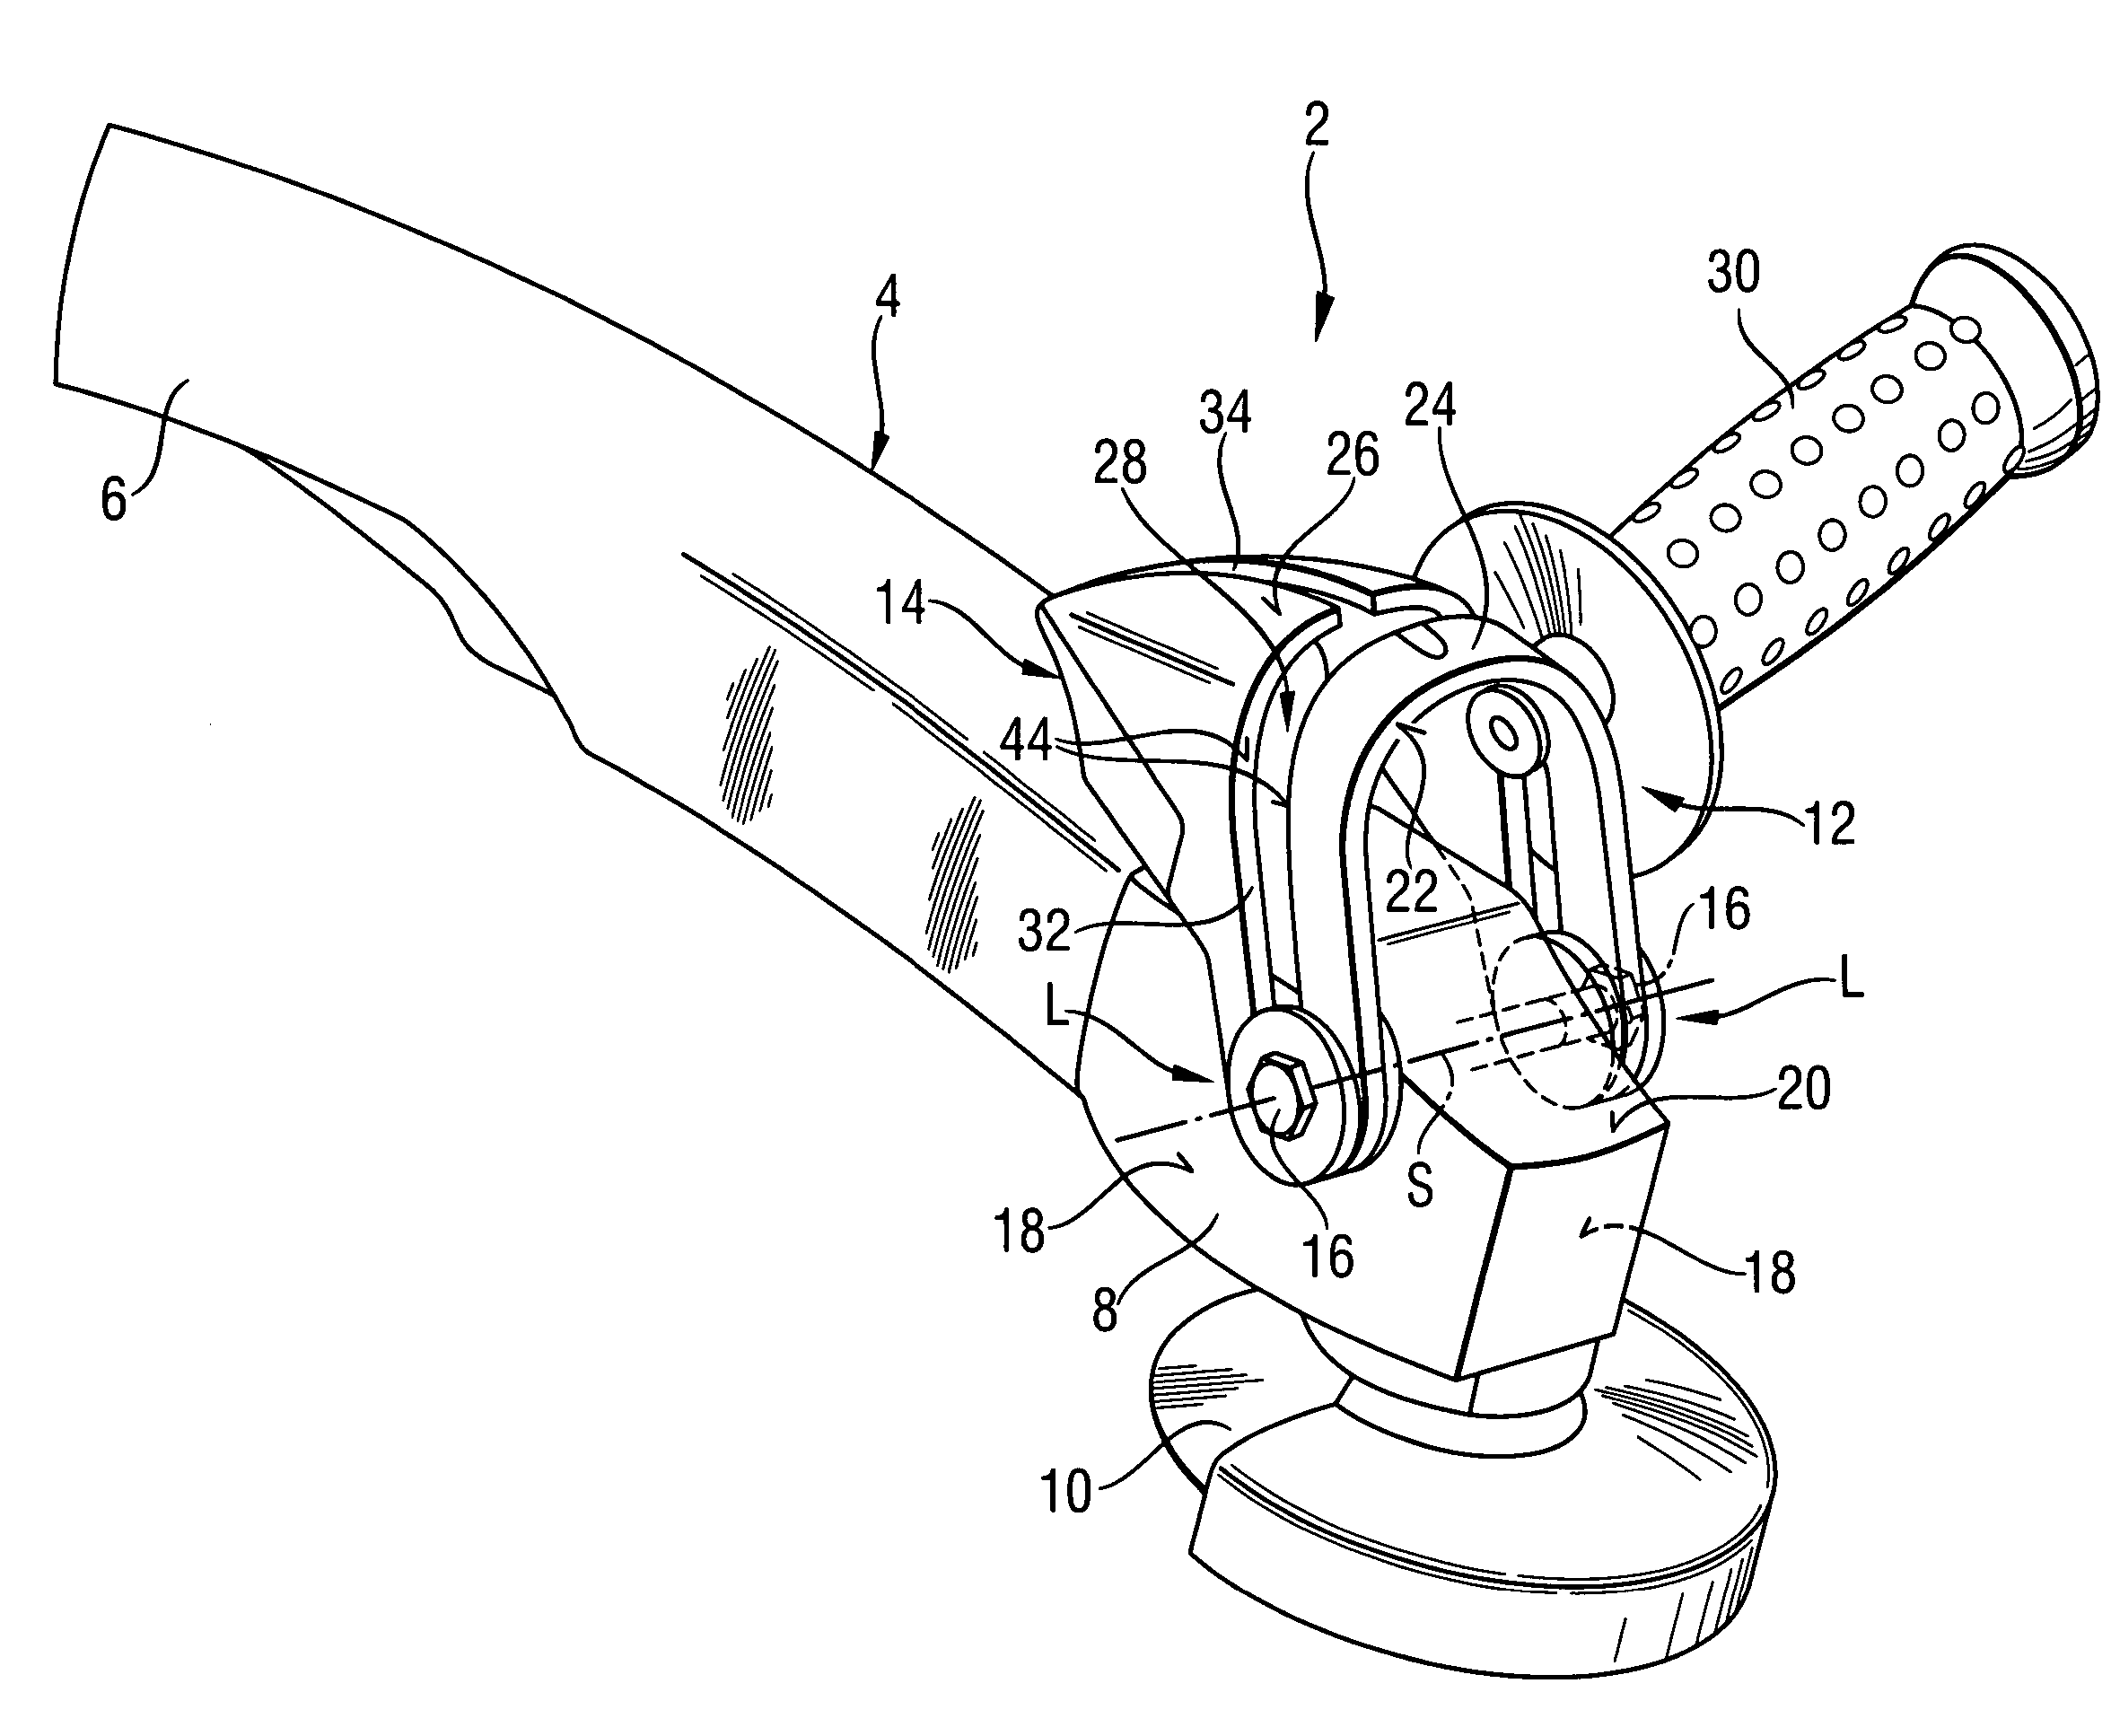 Hand-held power tool with an auxiliary handle